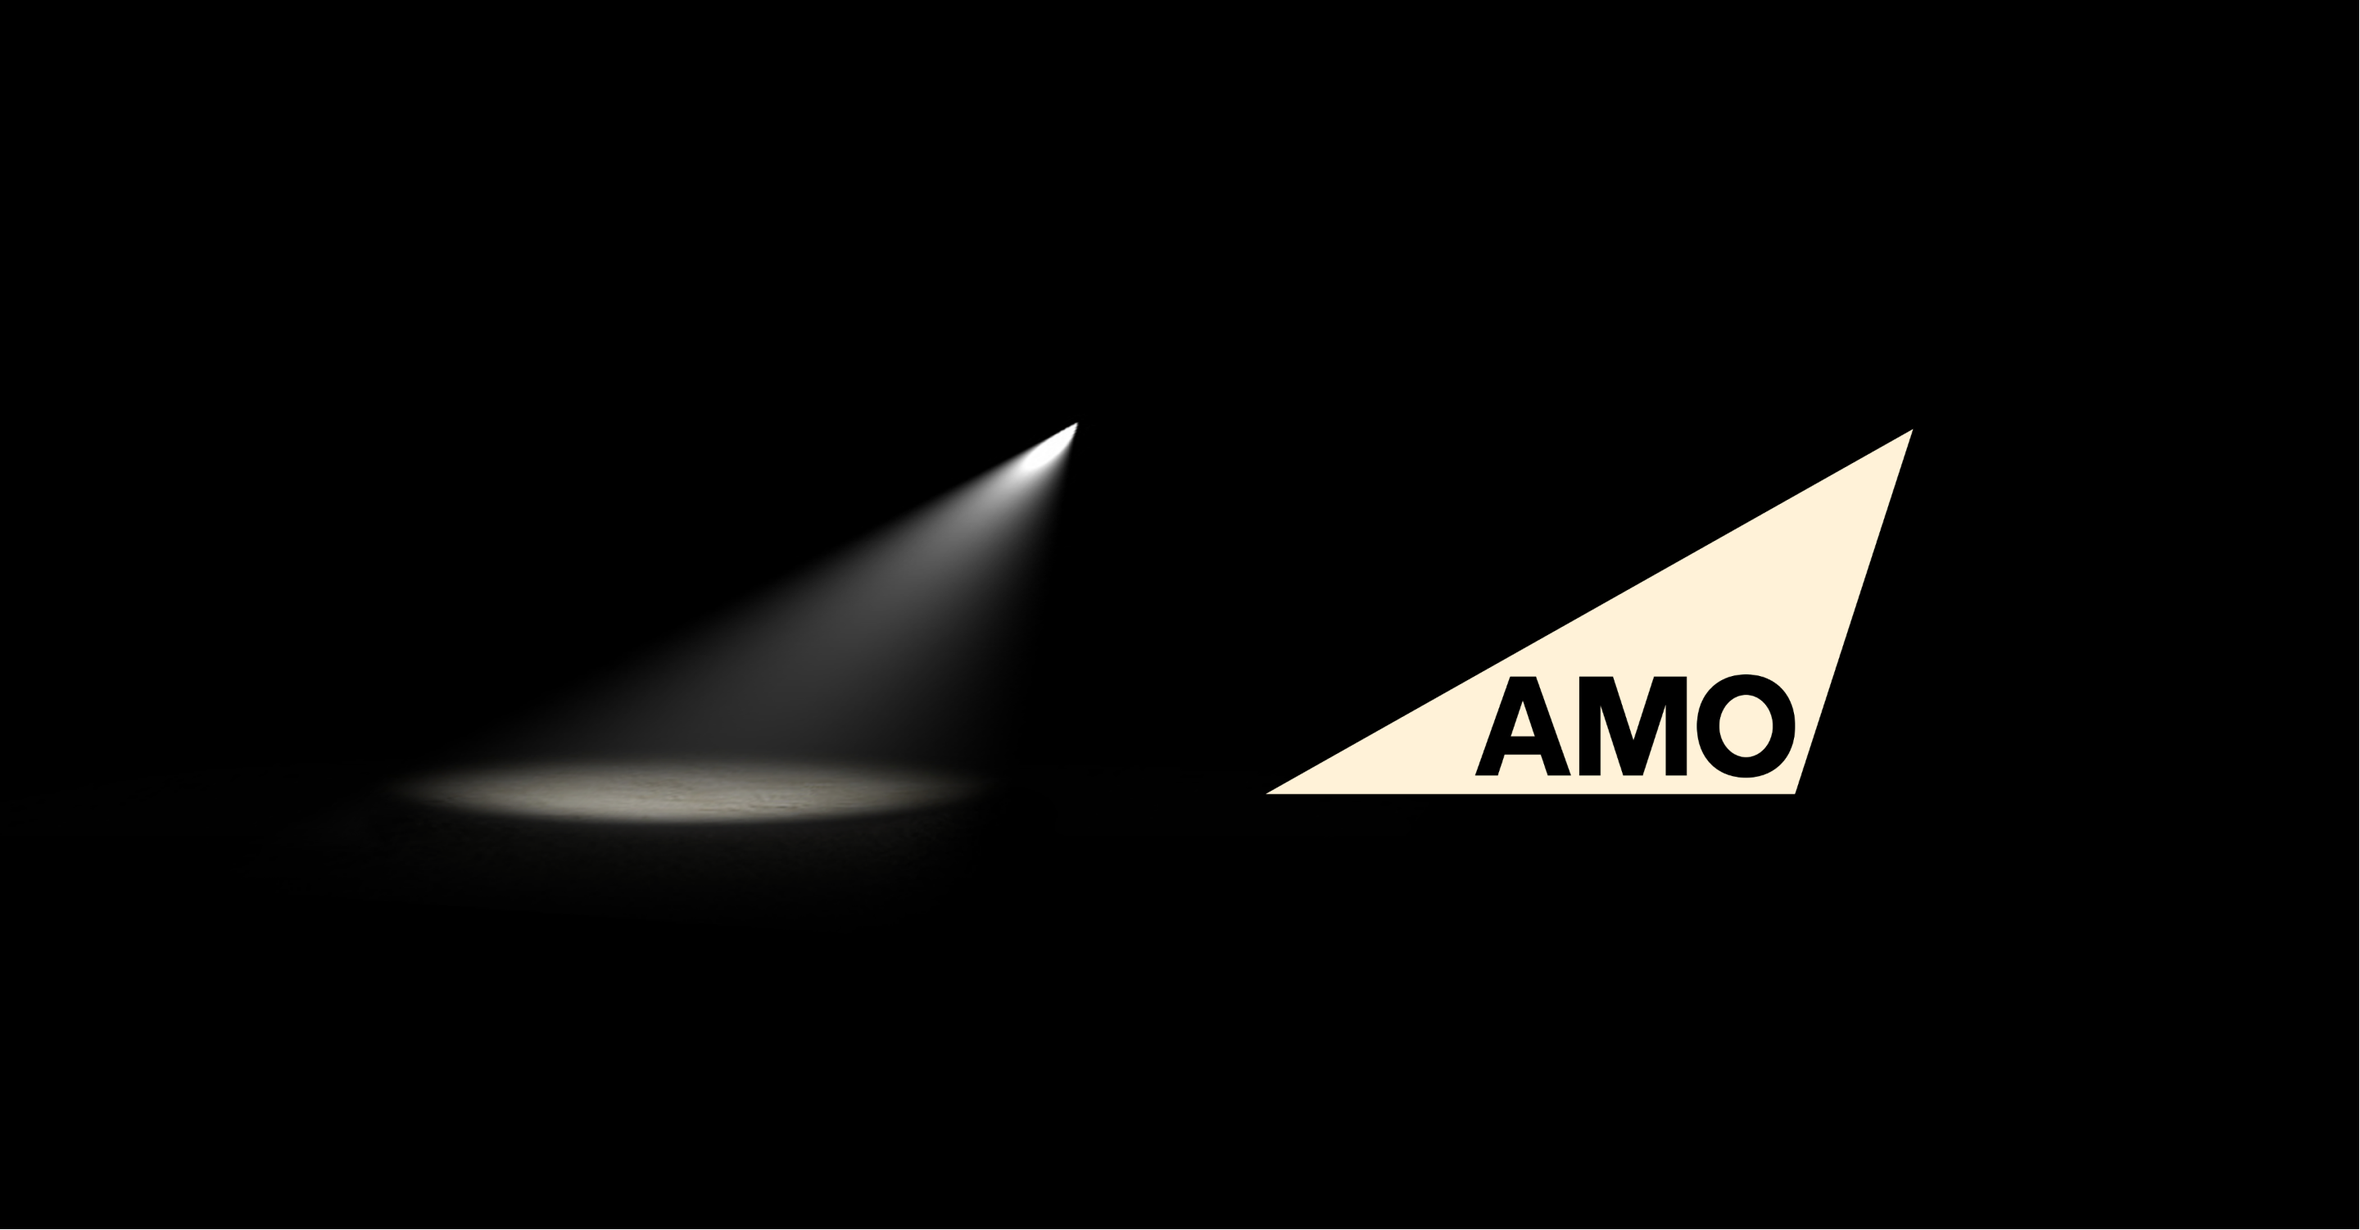 Branding and website for AMO